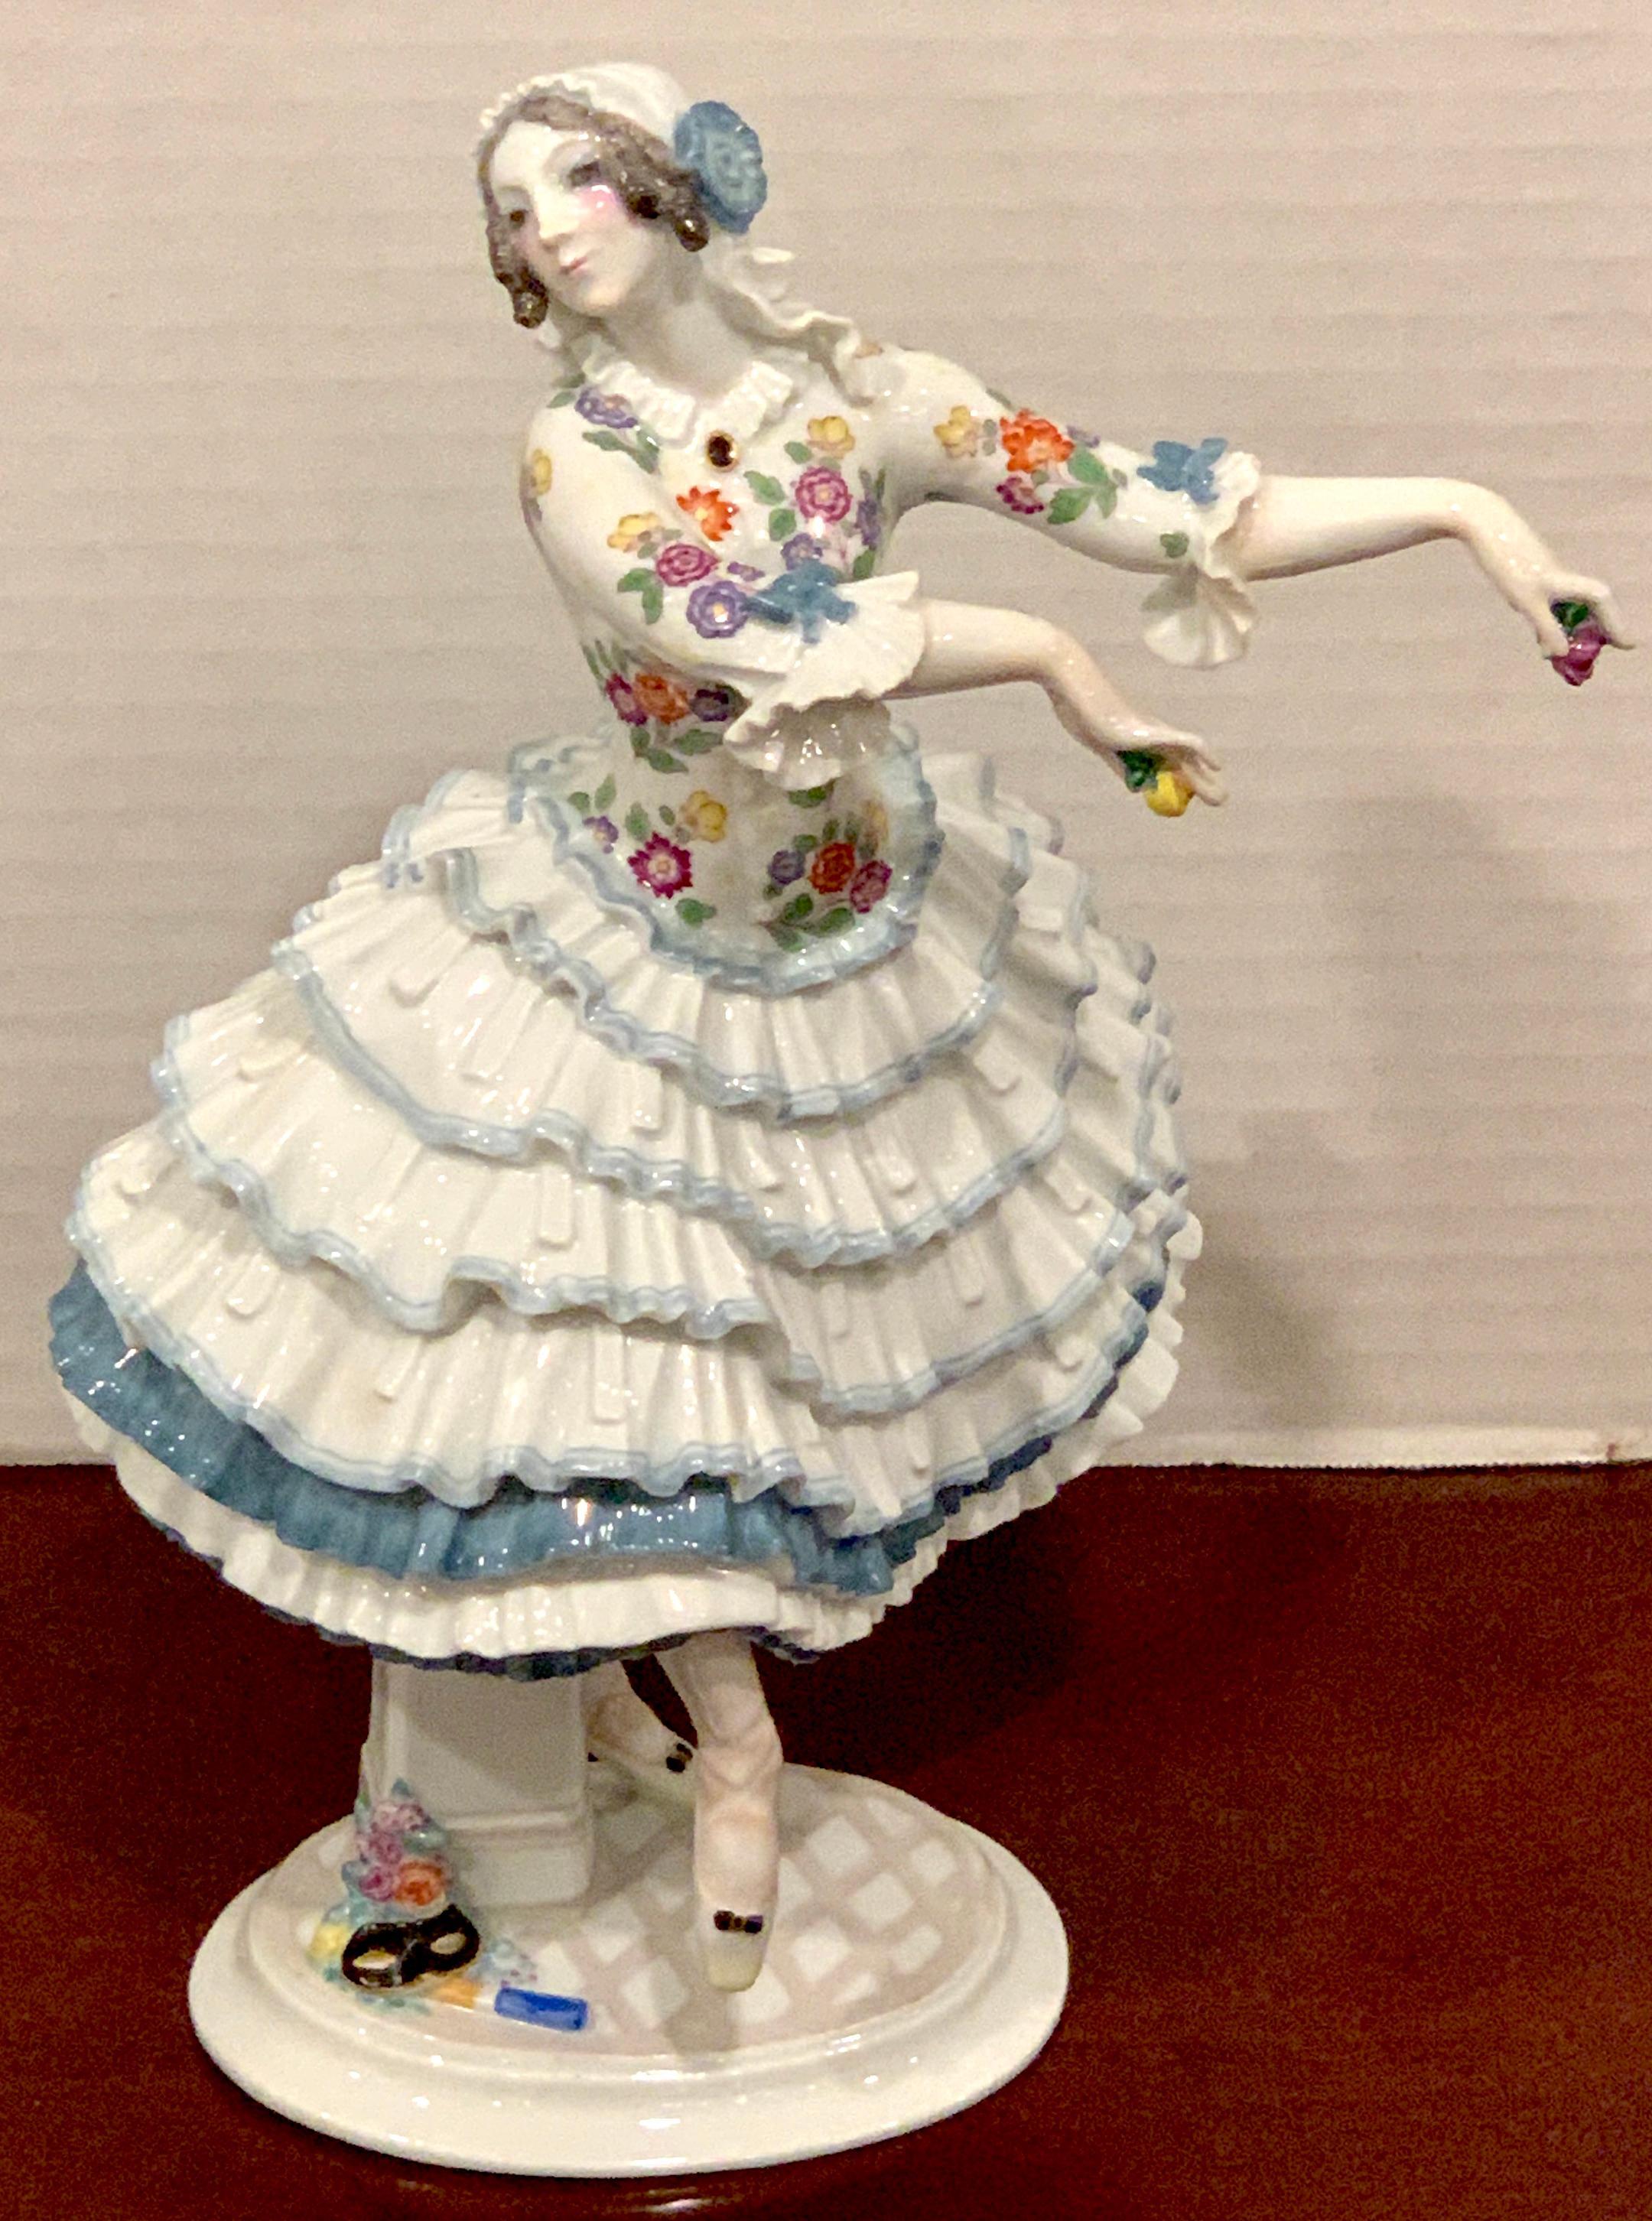 Meissen Russian Ballerina 'Chiarina', by Paul Scheurich
a fine examplke of the 'Chiarina' of Russian Ballet 
Made during the Pfeiffer Period 1924-34 
Paul Scheurich (1883-1945)
Paul Scheurich was painter, sculptor, graphic artist, drawer and